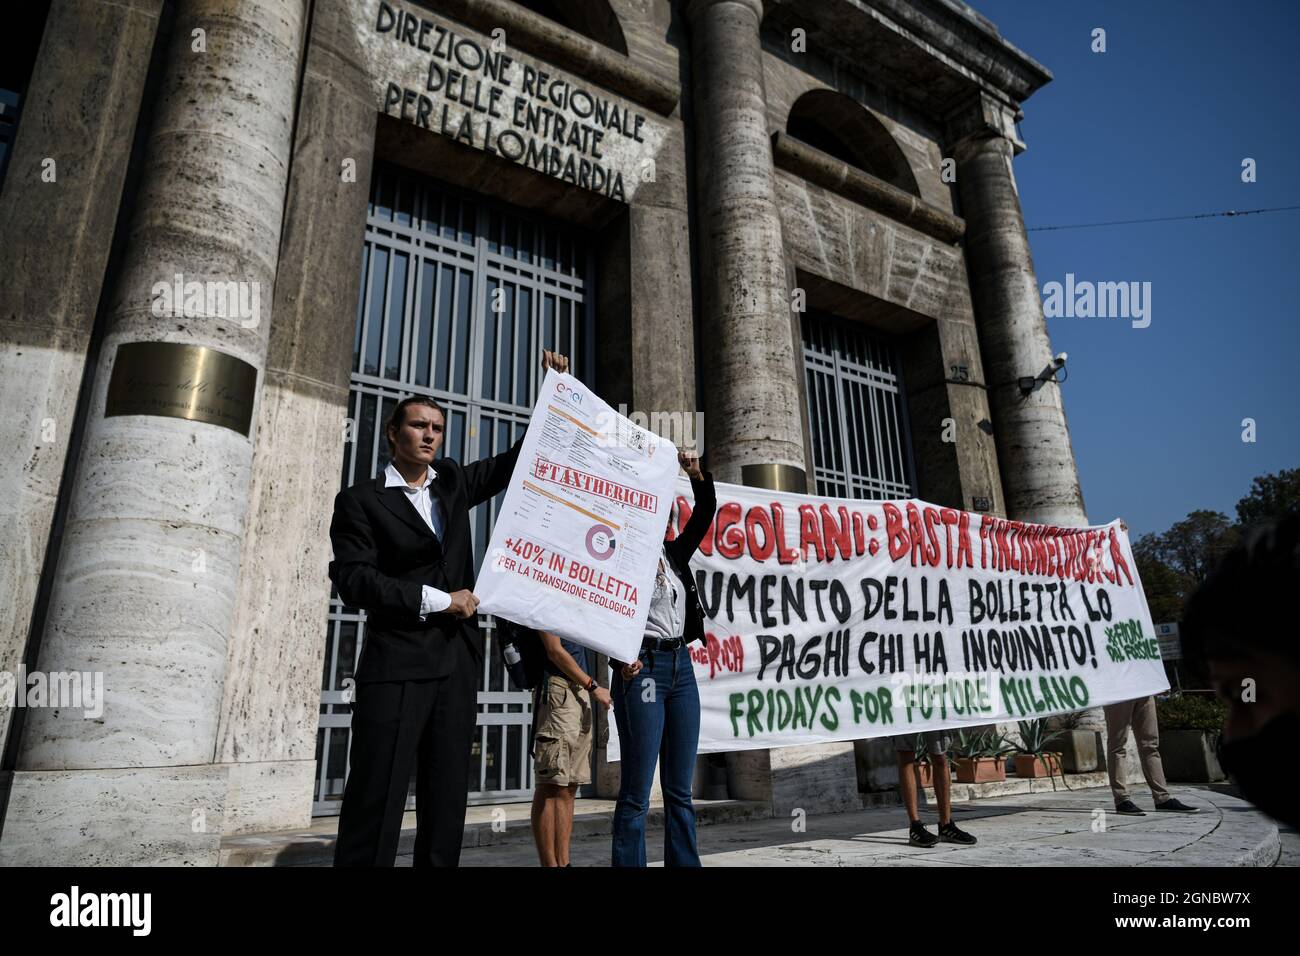 Milan, Italy. 24th Sep, 2021. people protest during the Fridays for Future - Climate strike in Milan, Italy to demand action to prevent further global warming and climate change. Credit: Piero Cruciatti/Alamy Live News Stock Photo